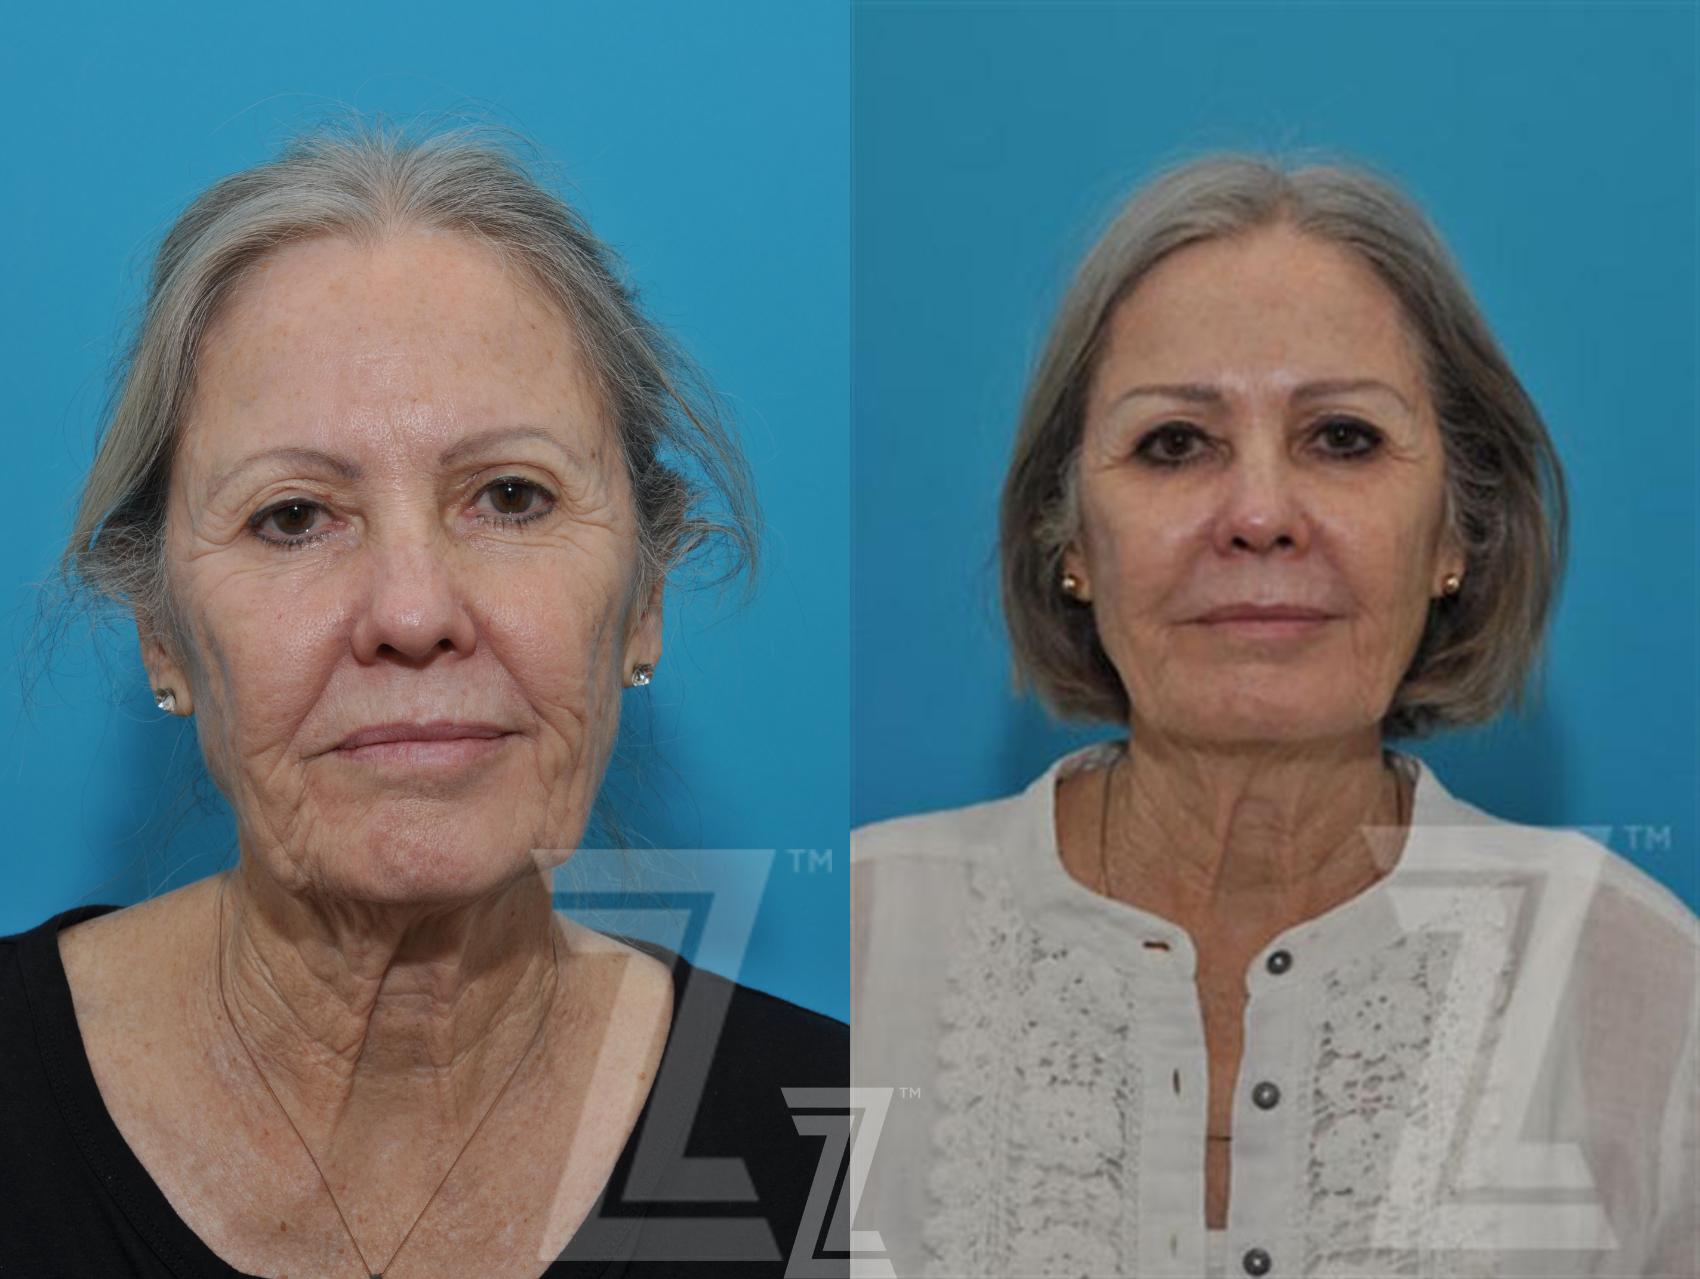 Sculptra® Before & After Photo | Austin, TX | The Piazza Center for Plastic Surgery & Advanced Skin Care